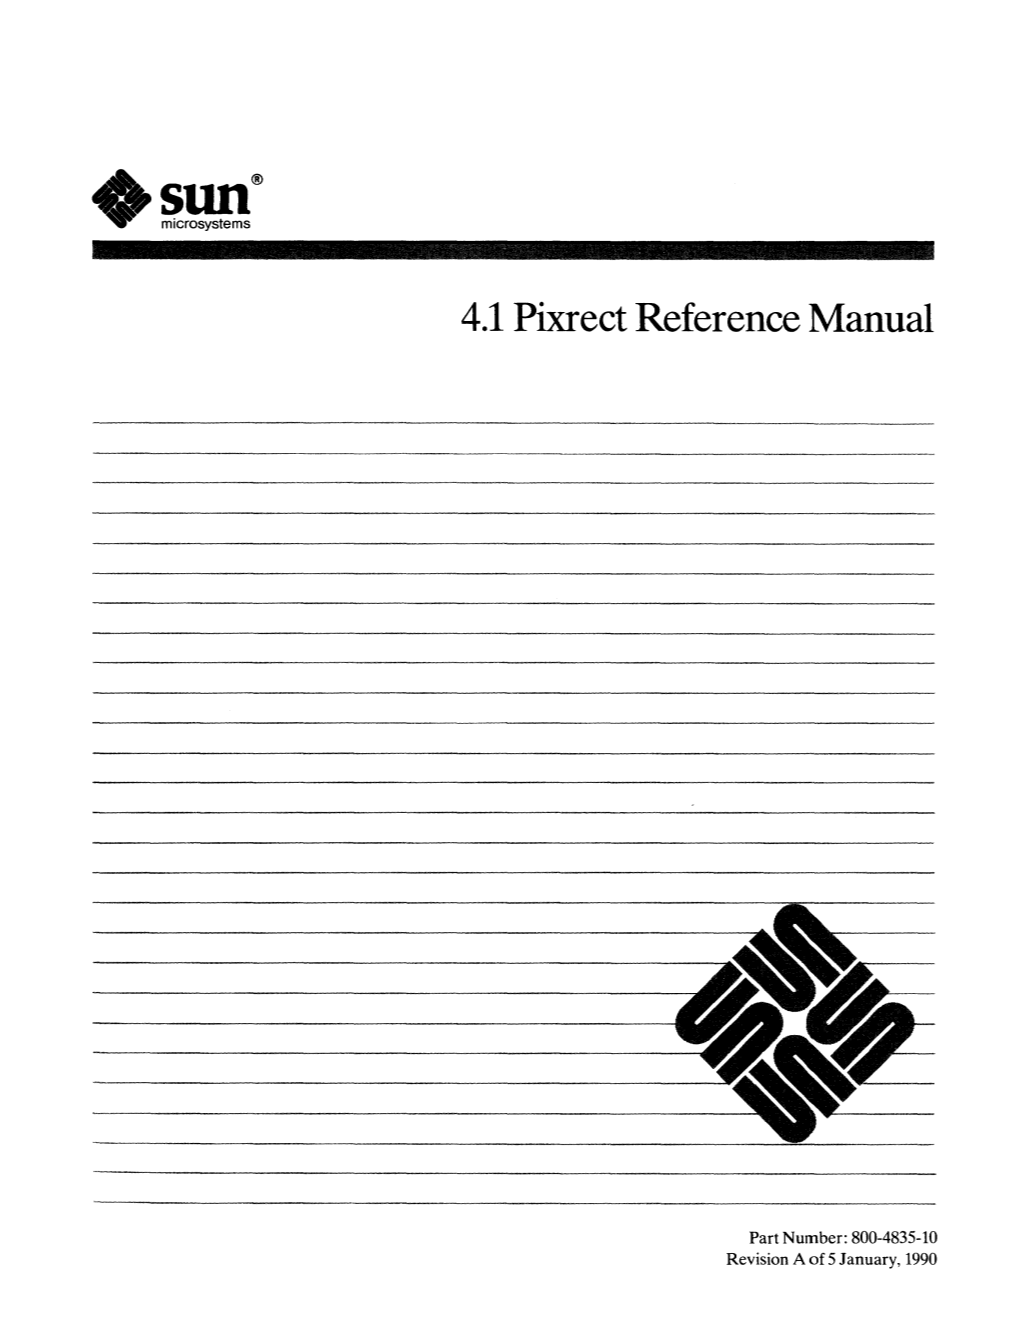 4.1 Pixrect Reference Manual